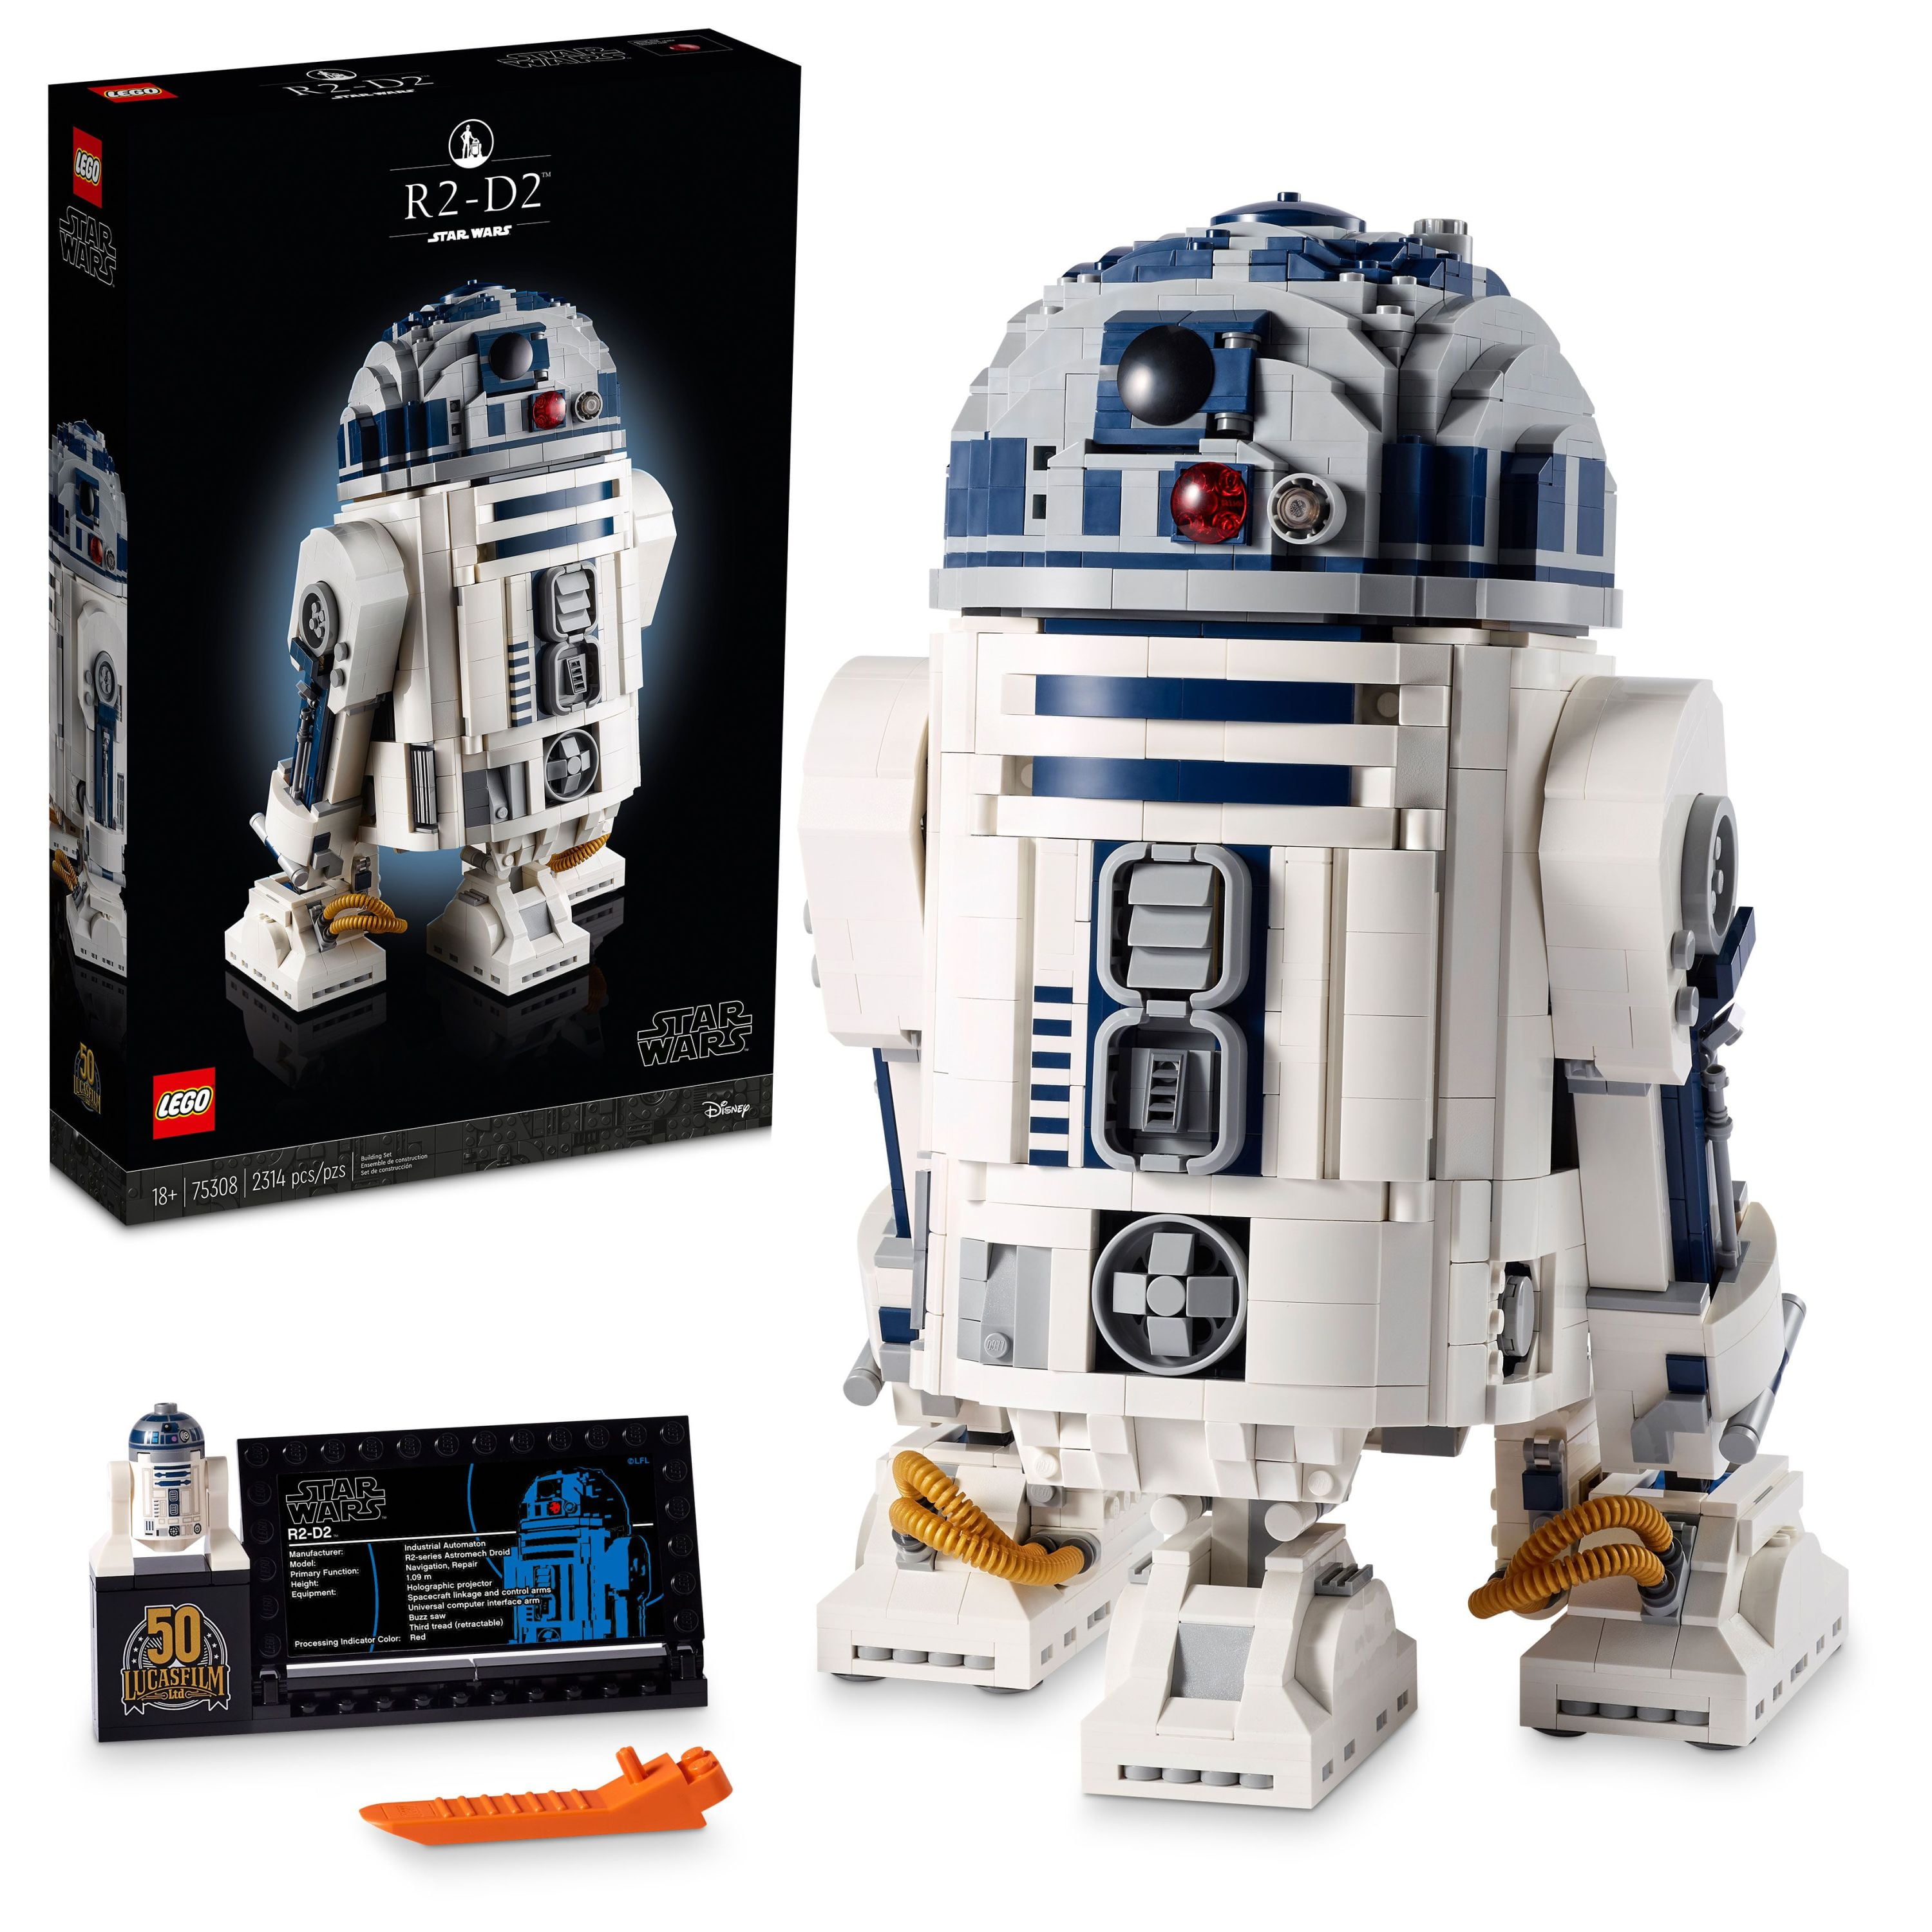 LEGO Star Wars R2-D2 75308 Droid Building Set for Adults, Collectible Display Model with Luke Skywalker's Lightsaber, Great Birthday and Anniversary Gift for Husbands, Wives, any Star Fans - Walmart.com